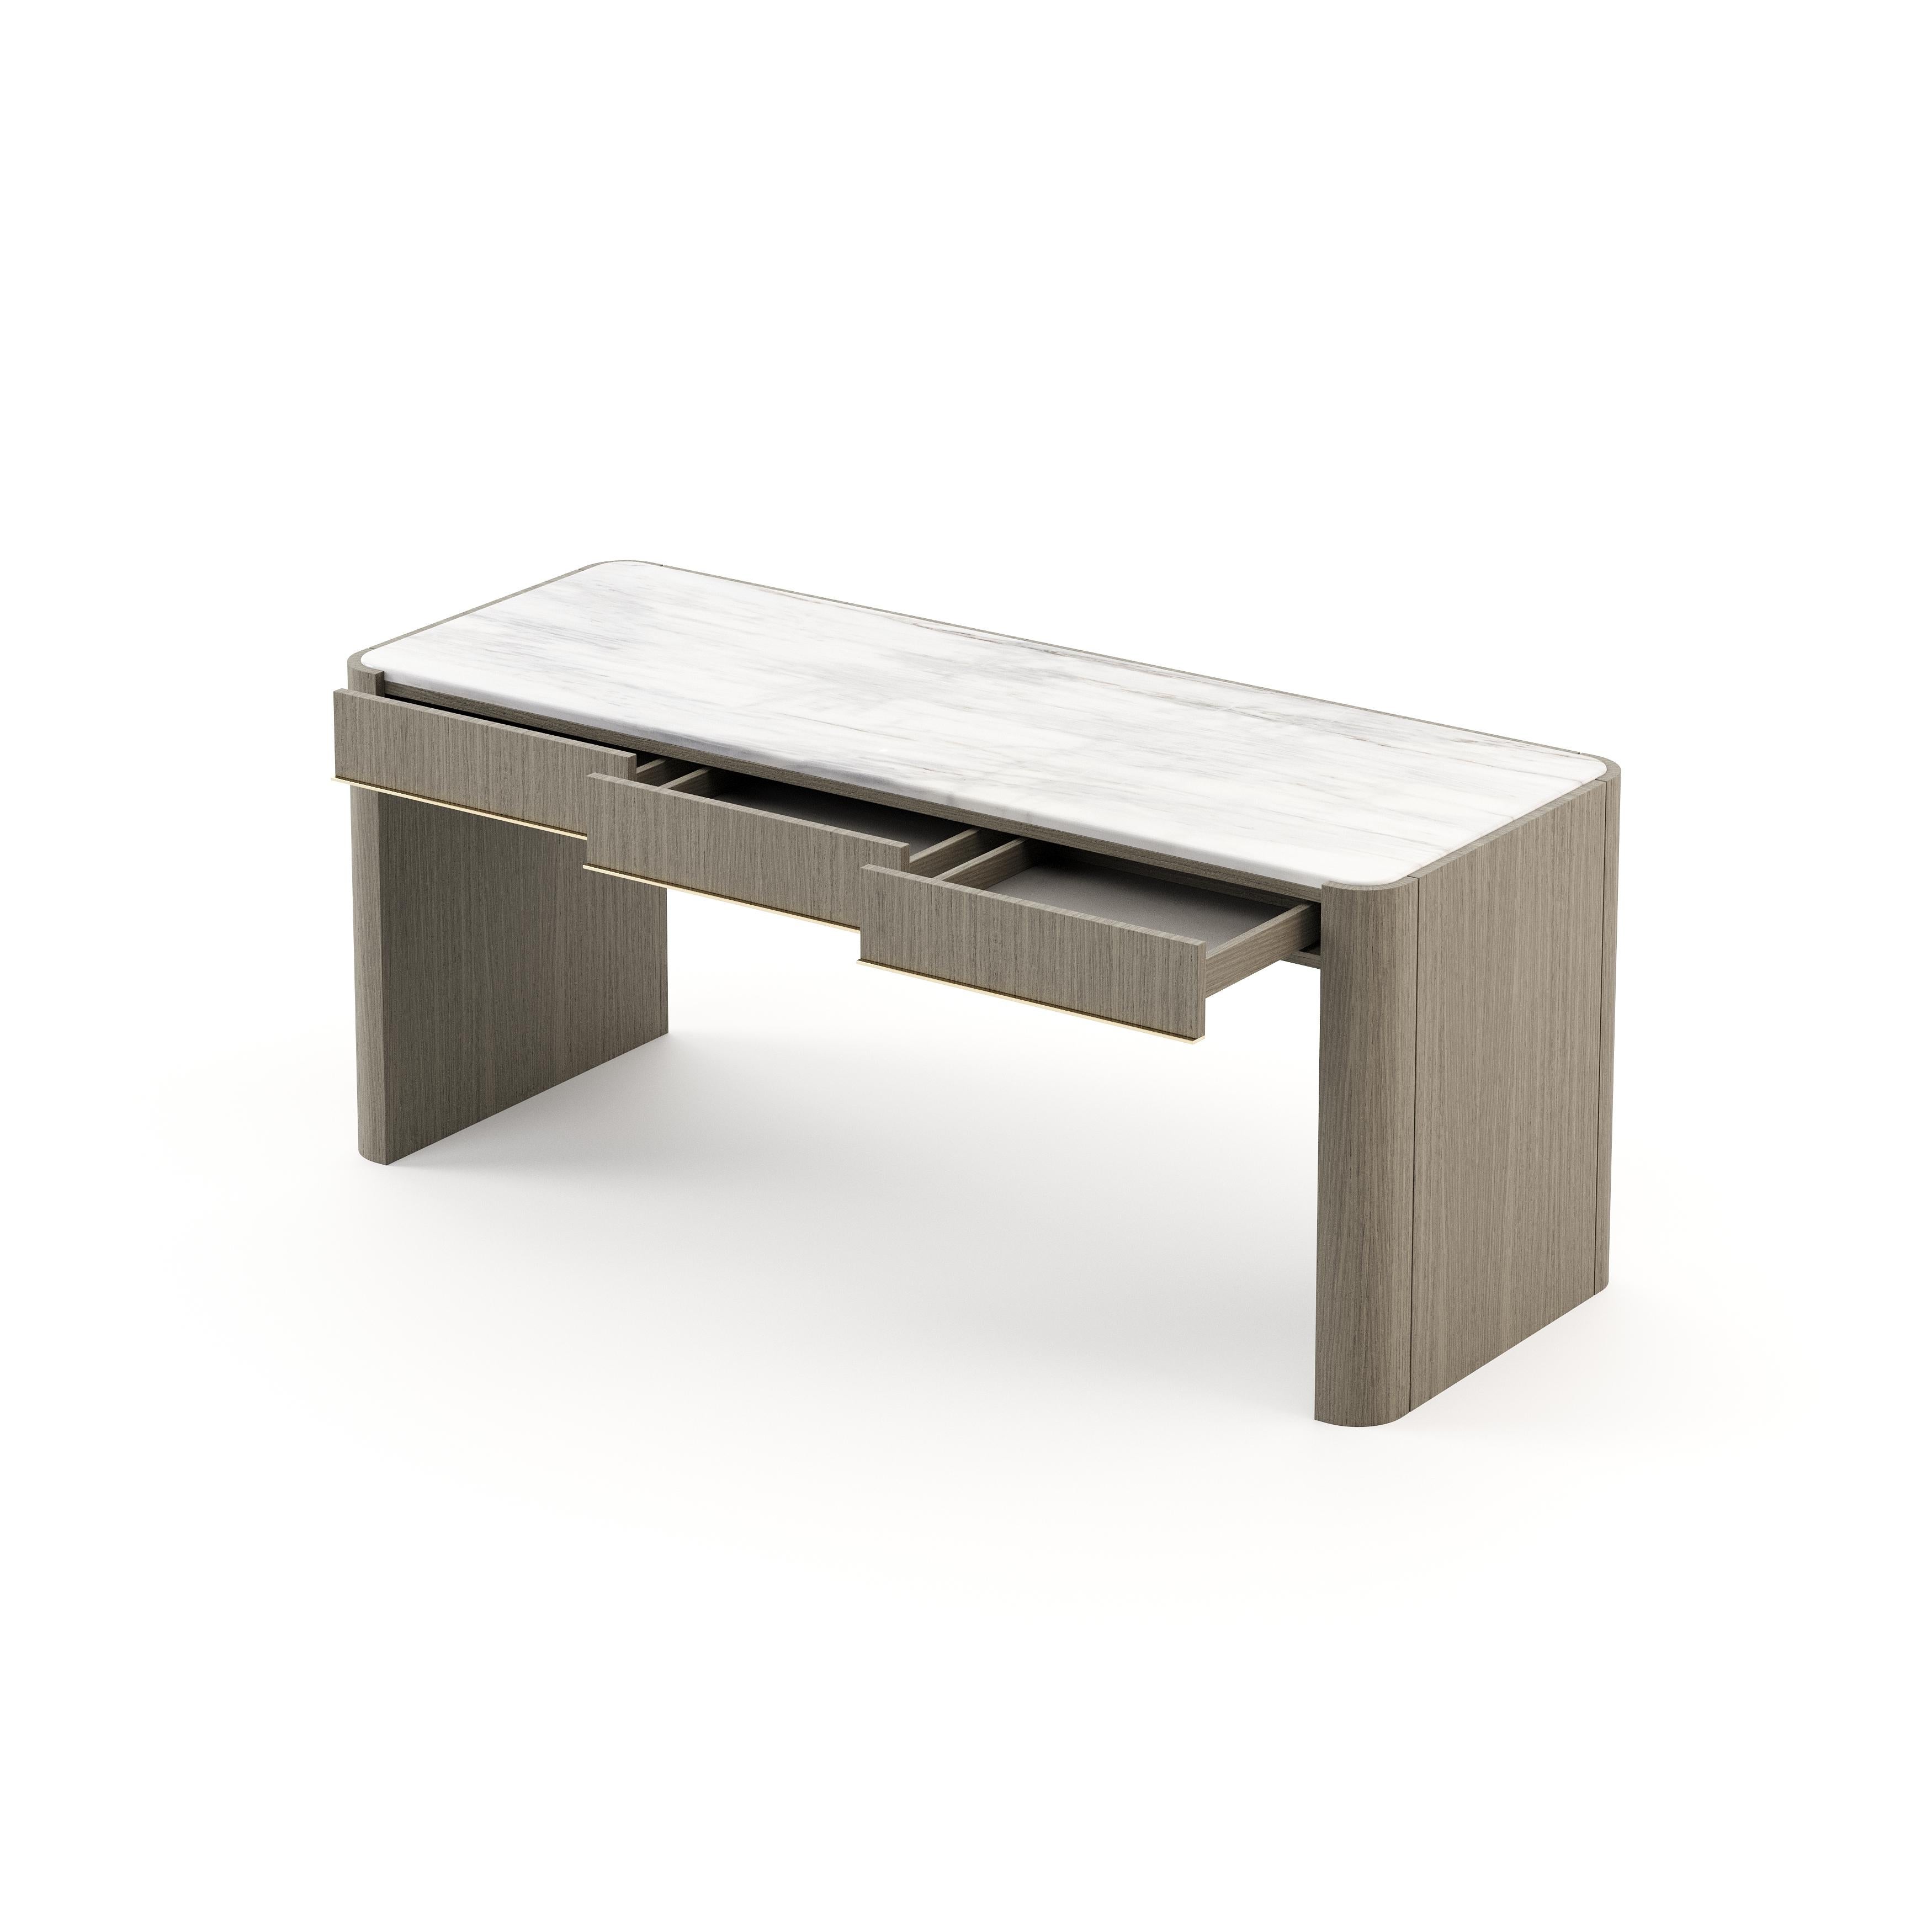 Portuguese 21st-century Contemporary office desk, with customisable wood veneer For Sale